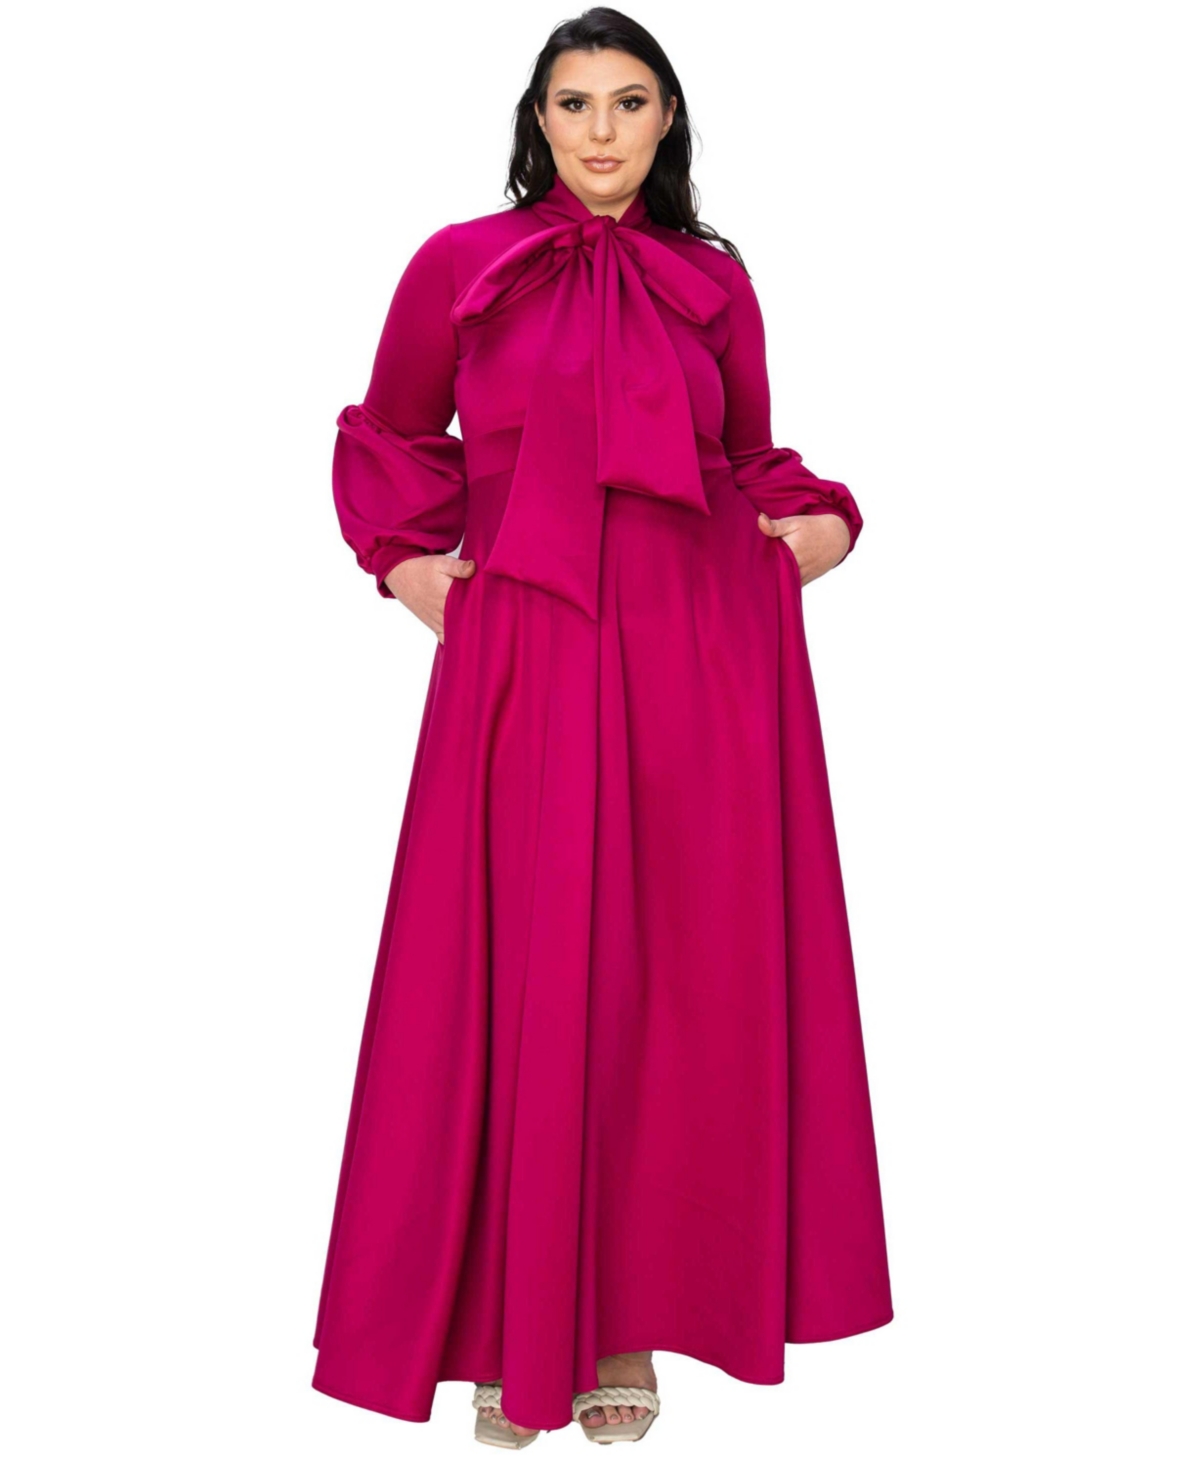 Plus Size Bella Donna Dress with Ribbon and Bishop Sleeves - Navy